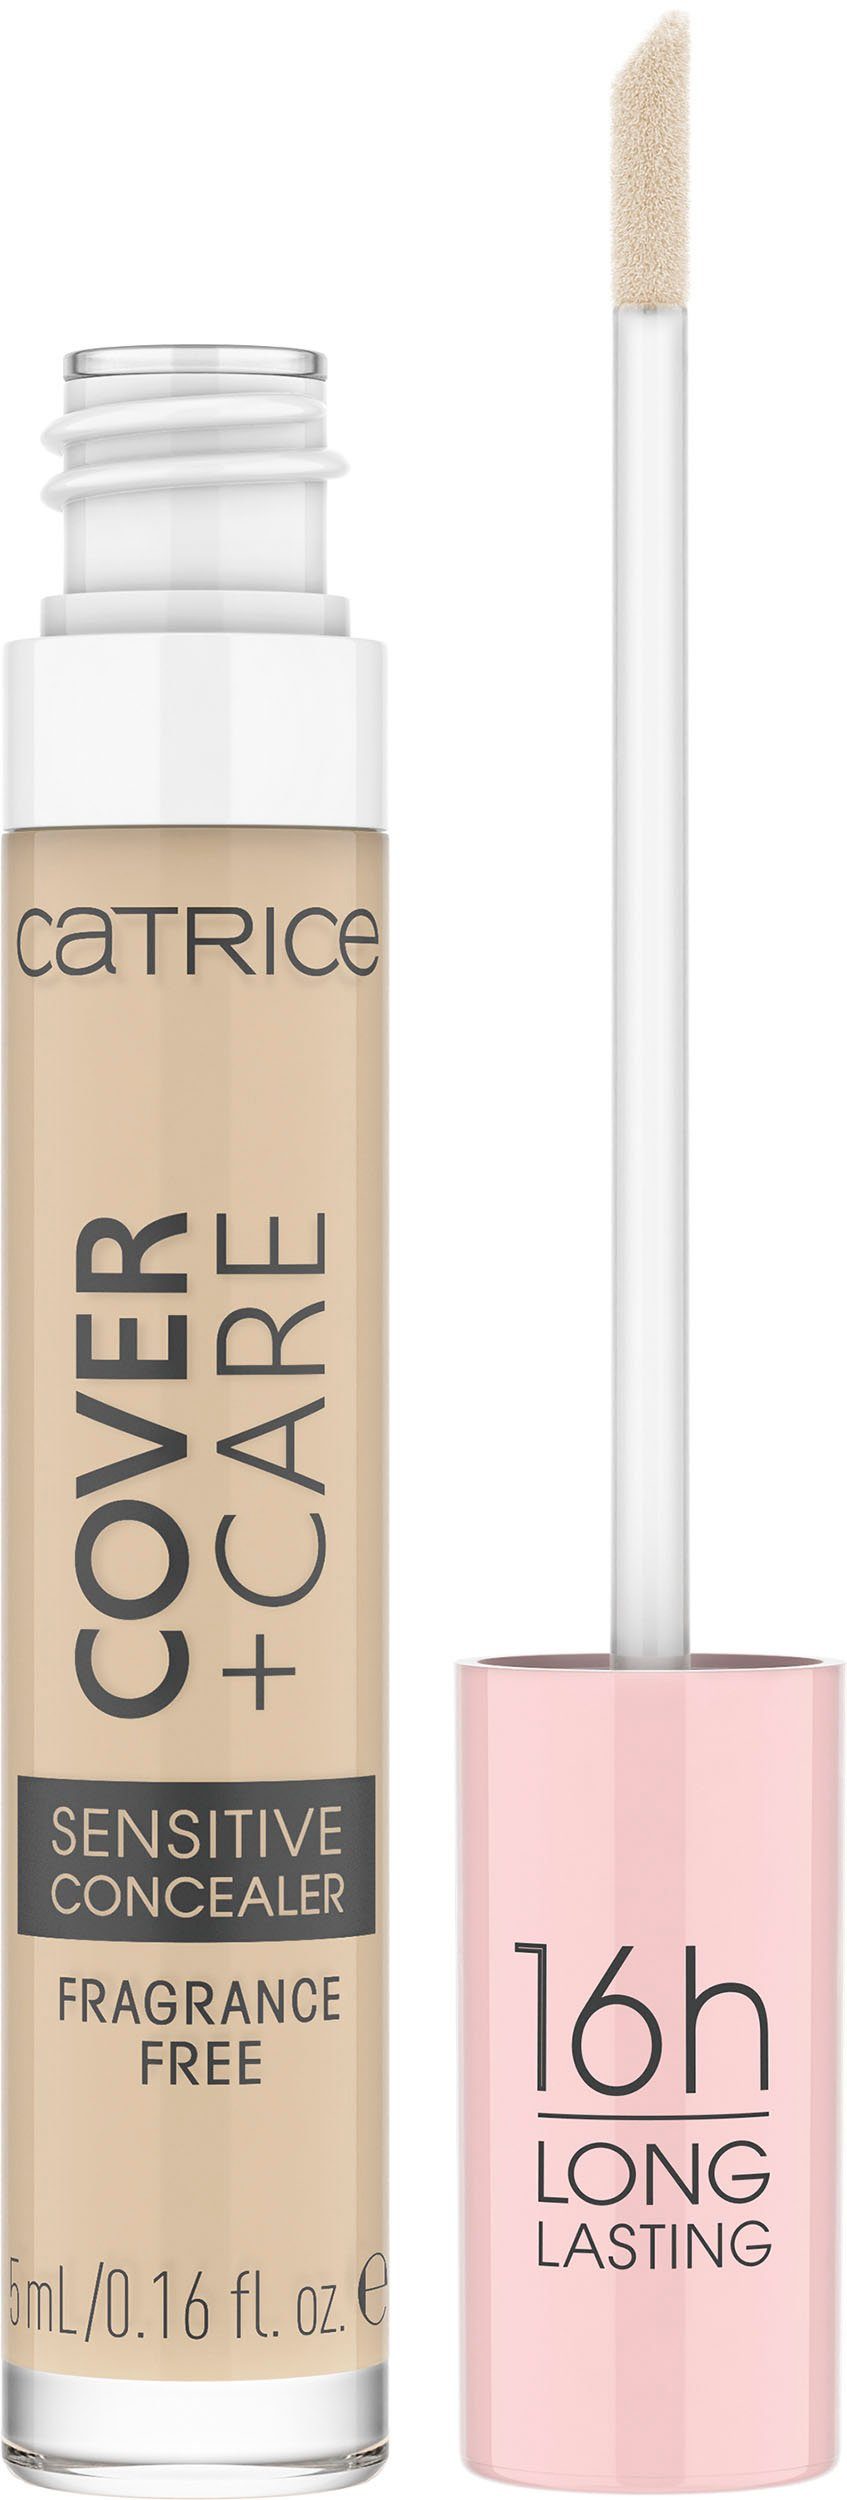 Cover Sensitive 3-tlg. nude + Catrice Concealer, Concealer 010C Care Catrice